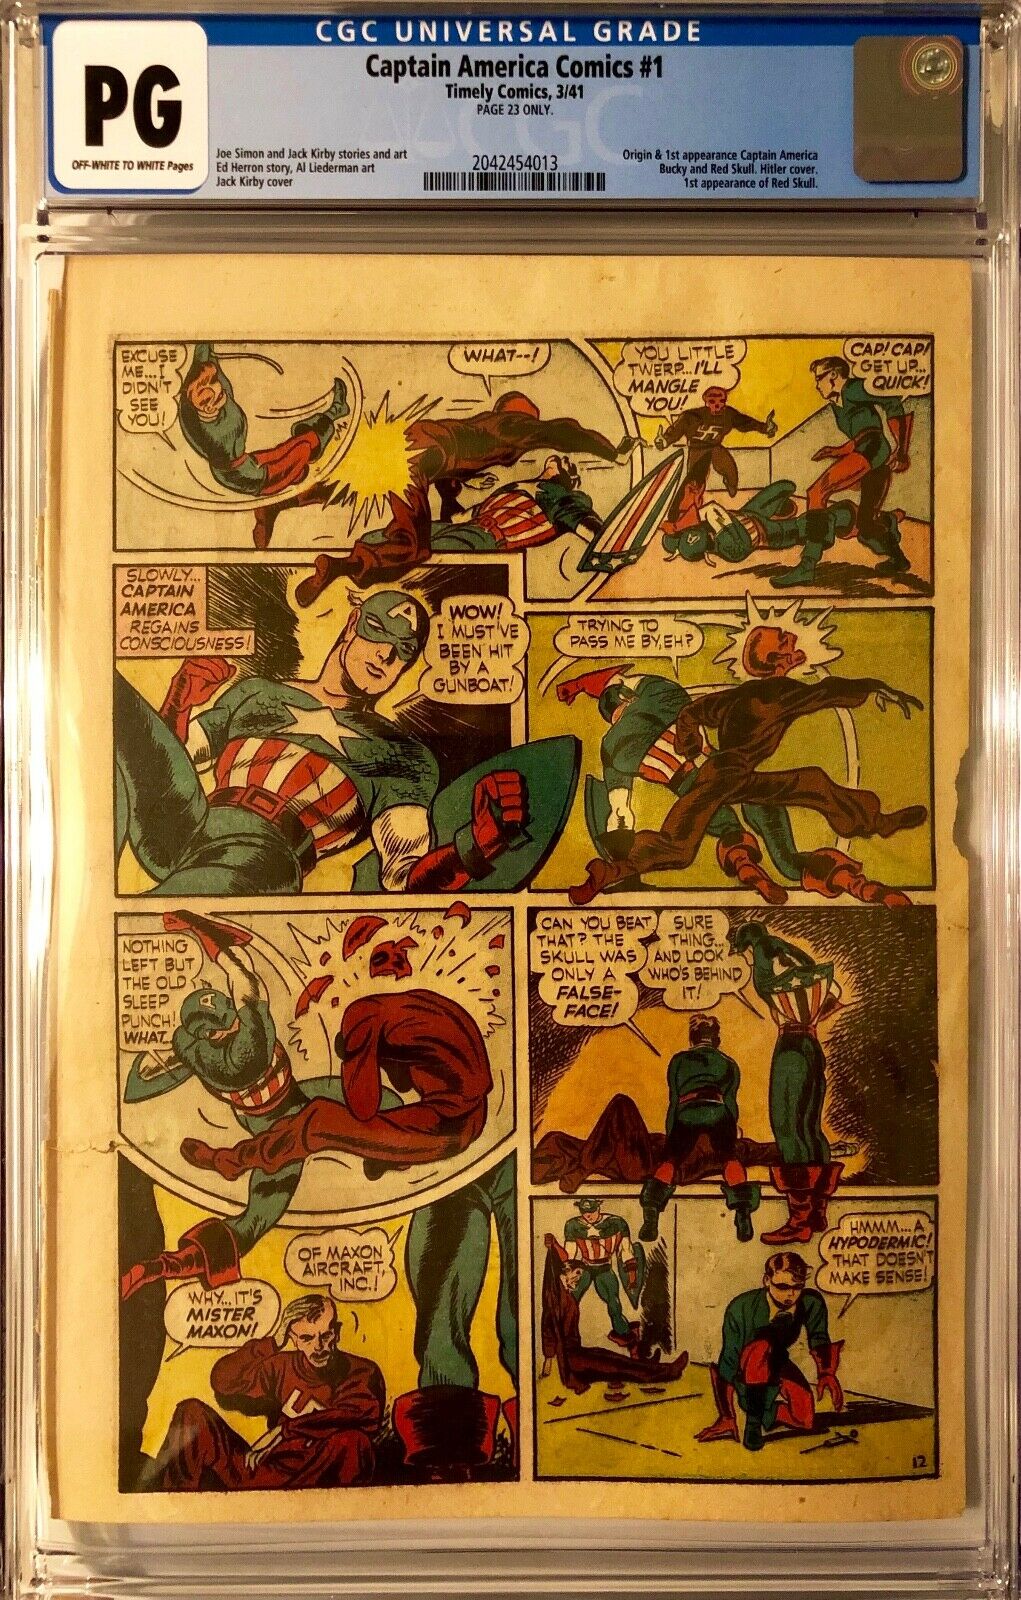 Captain America Comics 1 Page 23 ONLY CGC 1st Captain America Red Skull Bucky